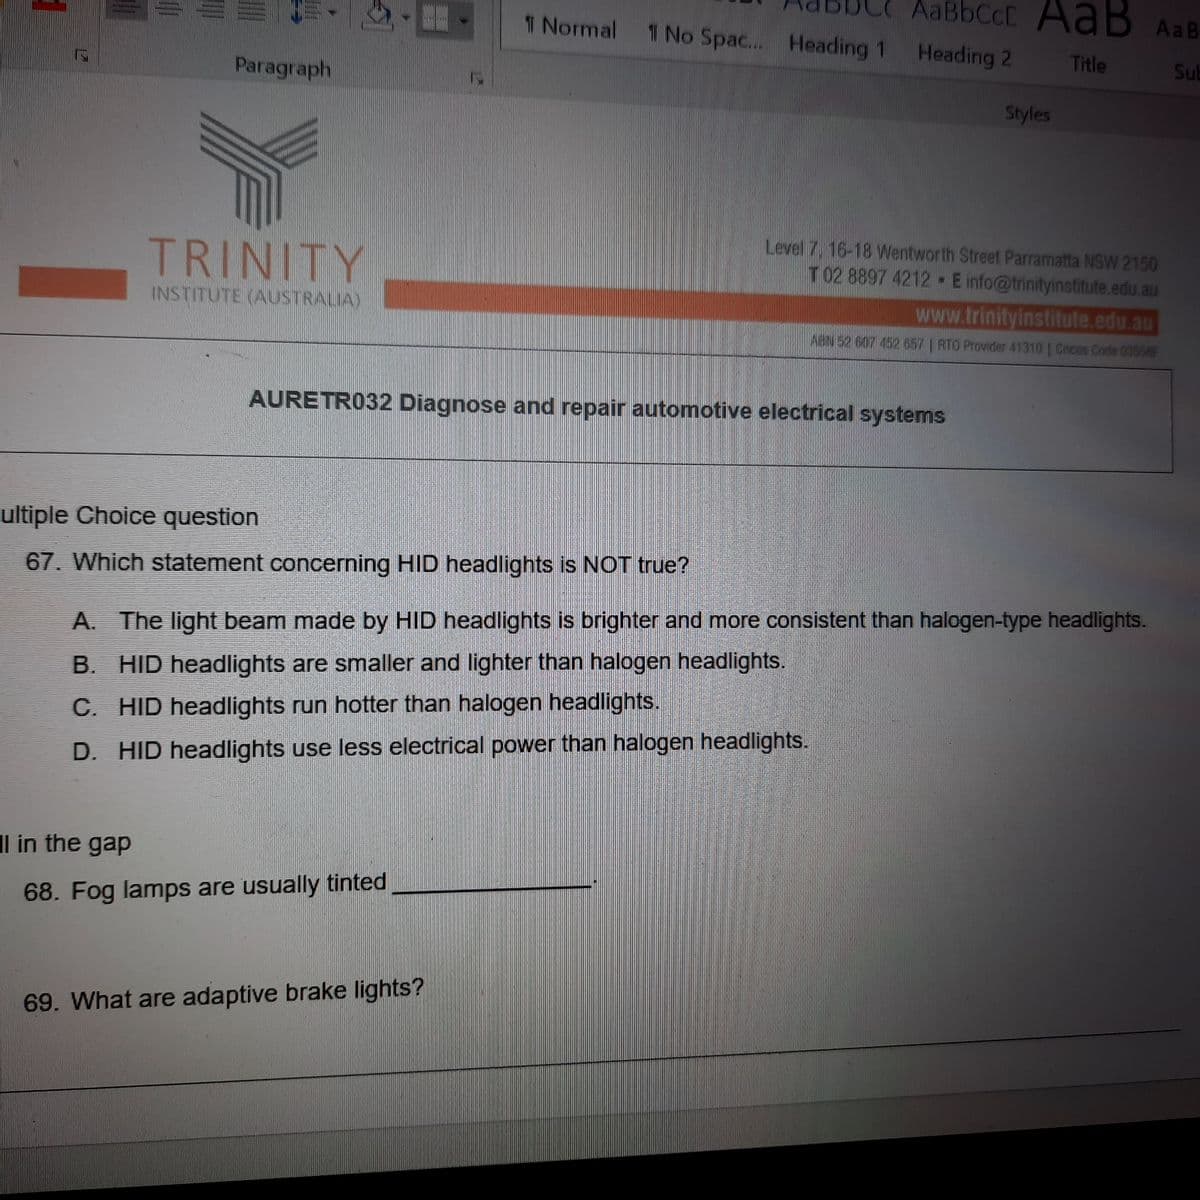 AaBbCcC AaB AaB
1 Normal TNo Spac... Heading 1
Heading 2
Title
Sub
Paragraph
Styles
TRINITY
Level 7, 16-18 Wentworth Street Parramatta NSW 2150
T 02 8897 4212 E info@trinityinstitute.edu.au
INSTITUTE (AUSTRALIA)
www.trinityinstitute.edu.au
ABN 52 607 452 657 | RTO Provider 41310 | Cncos Code 03556F
AURETR032 Diagnose and repair automotive electrical systems
ultiple Choice question
67. Which statement concerning HID headlights is NOT true?
A. The light beam made by HID headlights is brighter and more consistent than halogen-type headlights.
B. HID headlights are smaller and lighter than halogen headlights.
C. HID headlights run hotter than halogen headlights.
D. HID headlights use less electrical power than halogen headlights.
Il in the gap
68. Fog lamps are usually tinted
69. What are adaptive brake lights?
